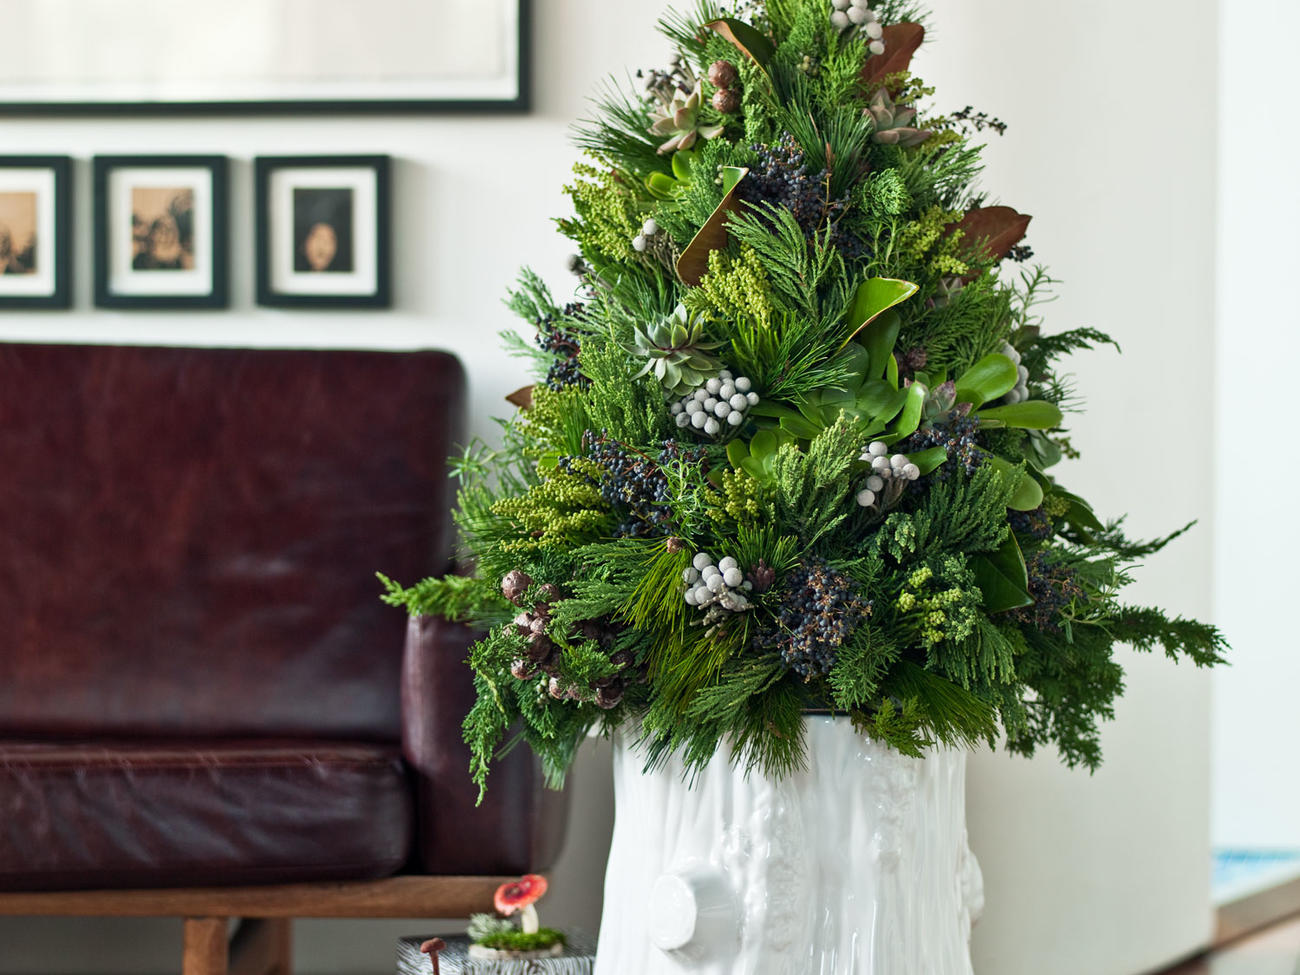 From Nearly Bare to Decked with Crafts, Here’s How We Like Our Christmas Trees